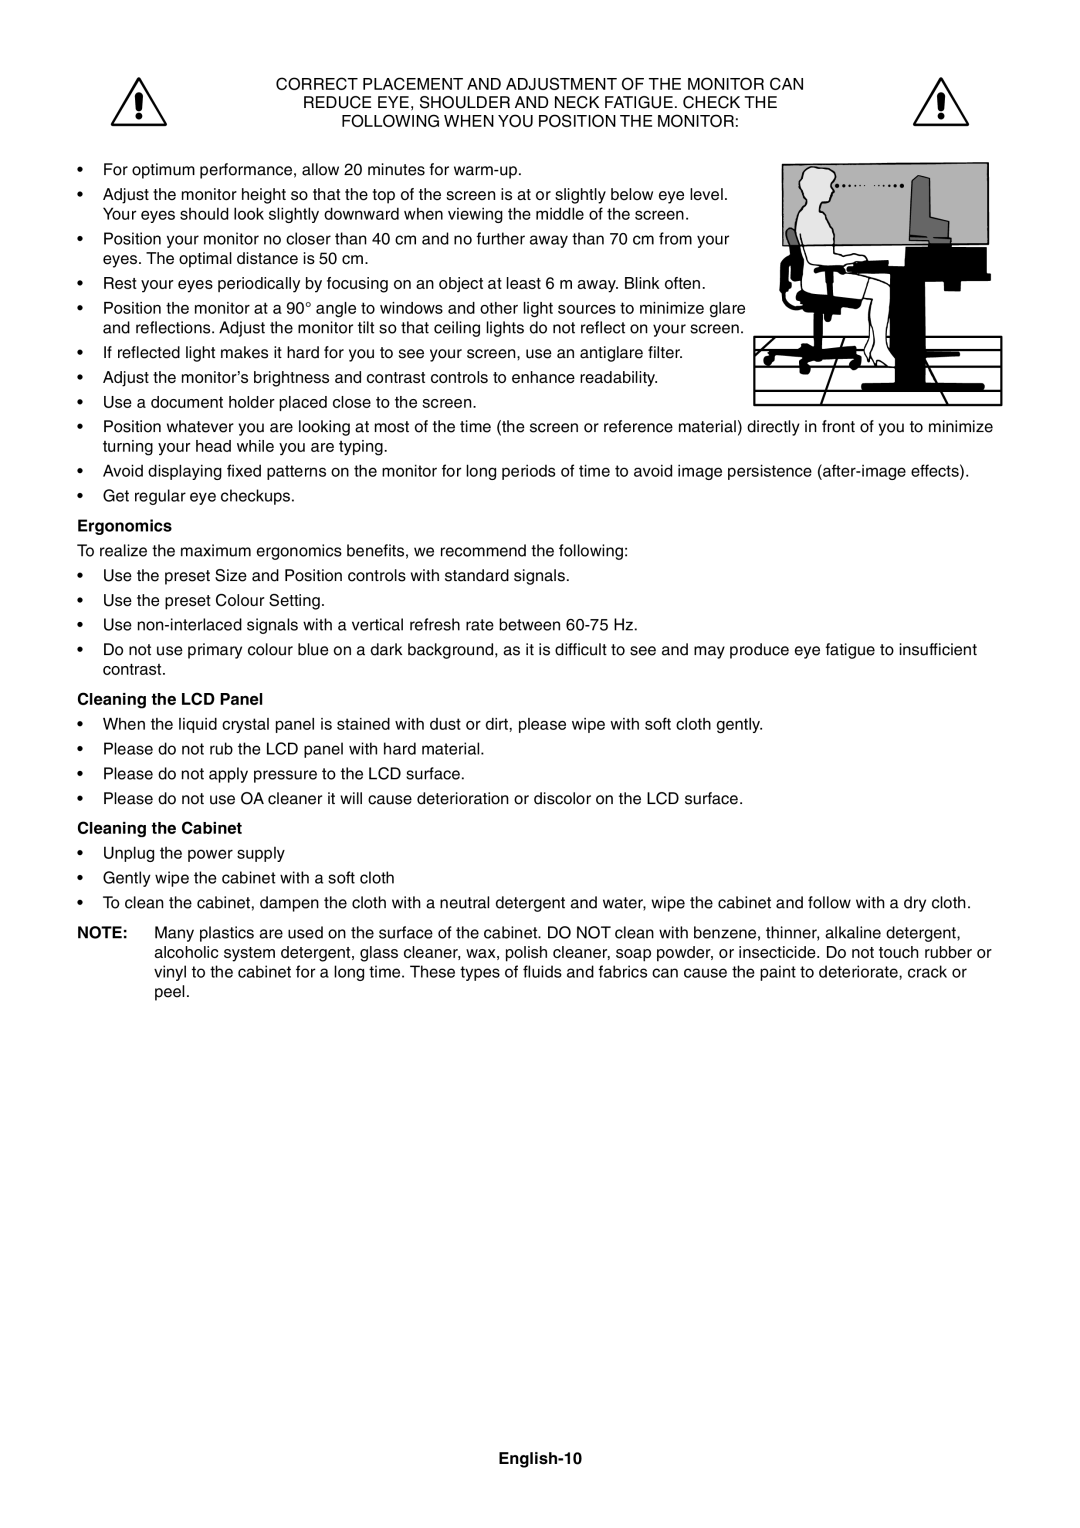 NEC LCD1970NX user manual Ergonomics, Cleaning the LCD Panel, Cleaning the Cabinet, English-10 